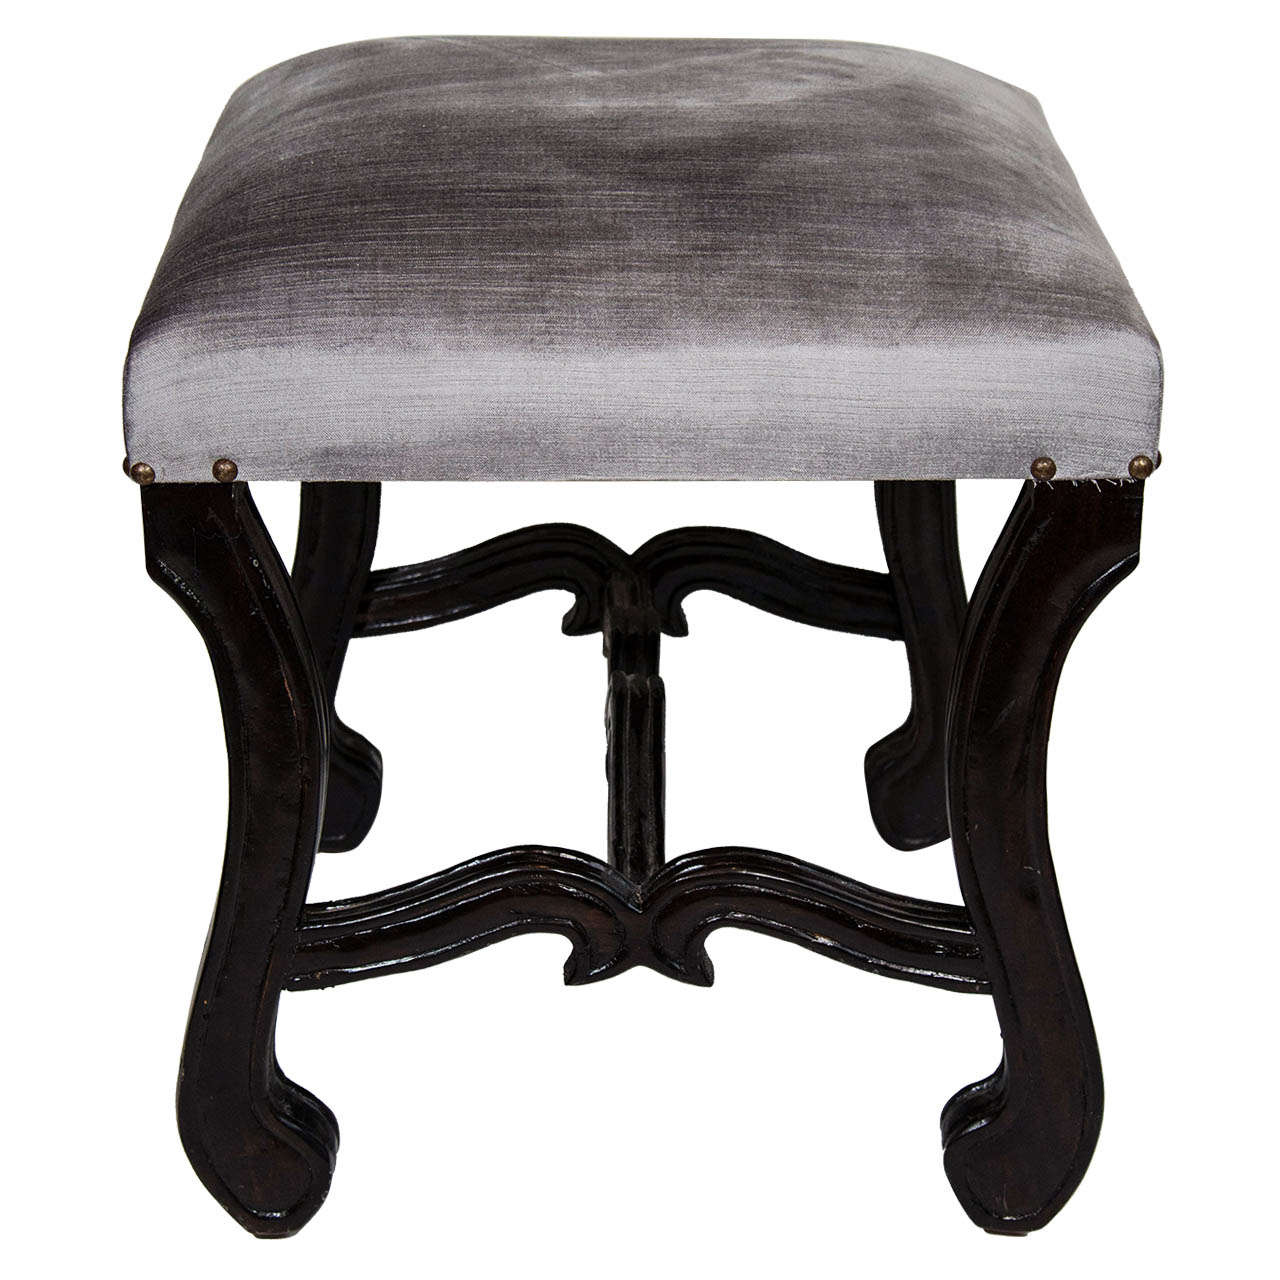 Elegant midcentury vanity stool with hand carved walnut wood base in ebonized finish. Newly upholstered in luxe grey velvet with antique brass stud details. The bench features scrolled cabriole leg design and stylized cross stretcher with carved